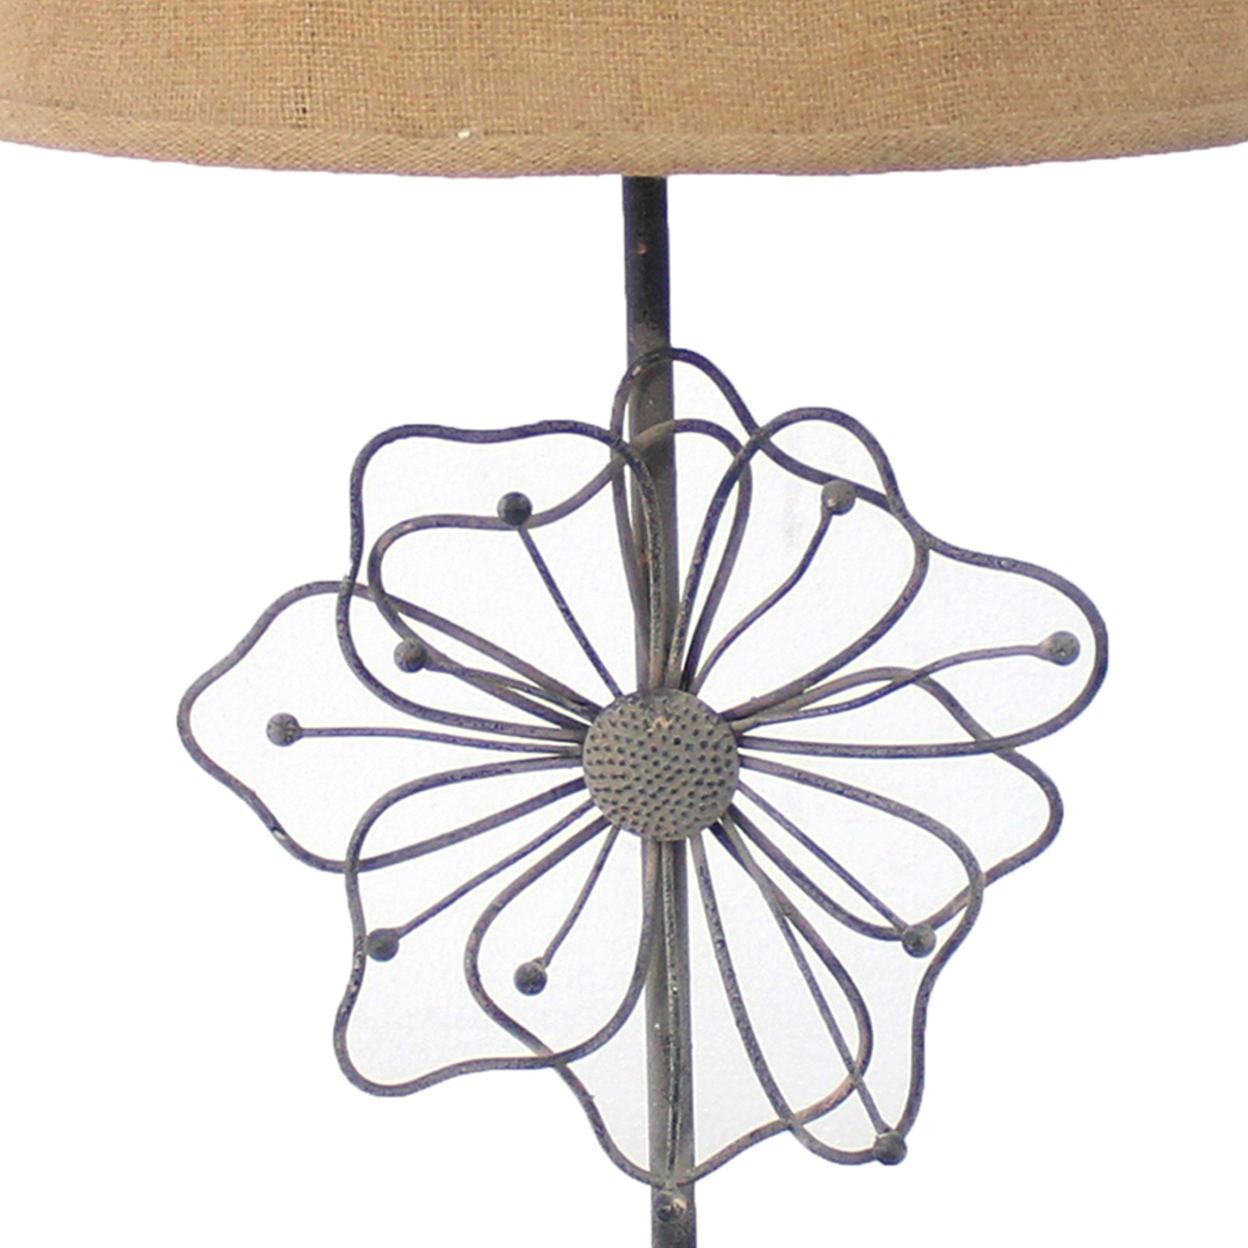 Metal Table Lamp With Flower Accent And Block Base,Beige And Gray- Saltoro Sherpi